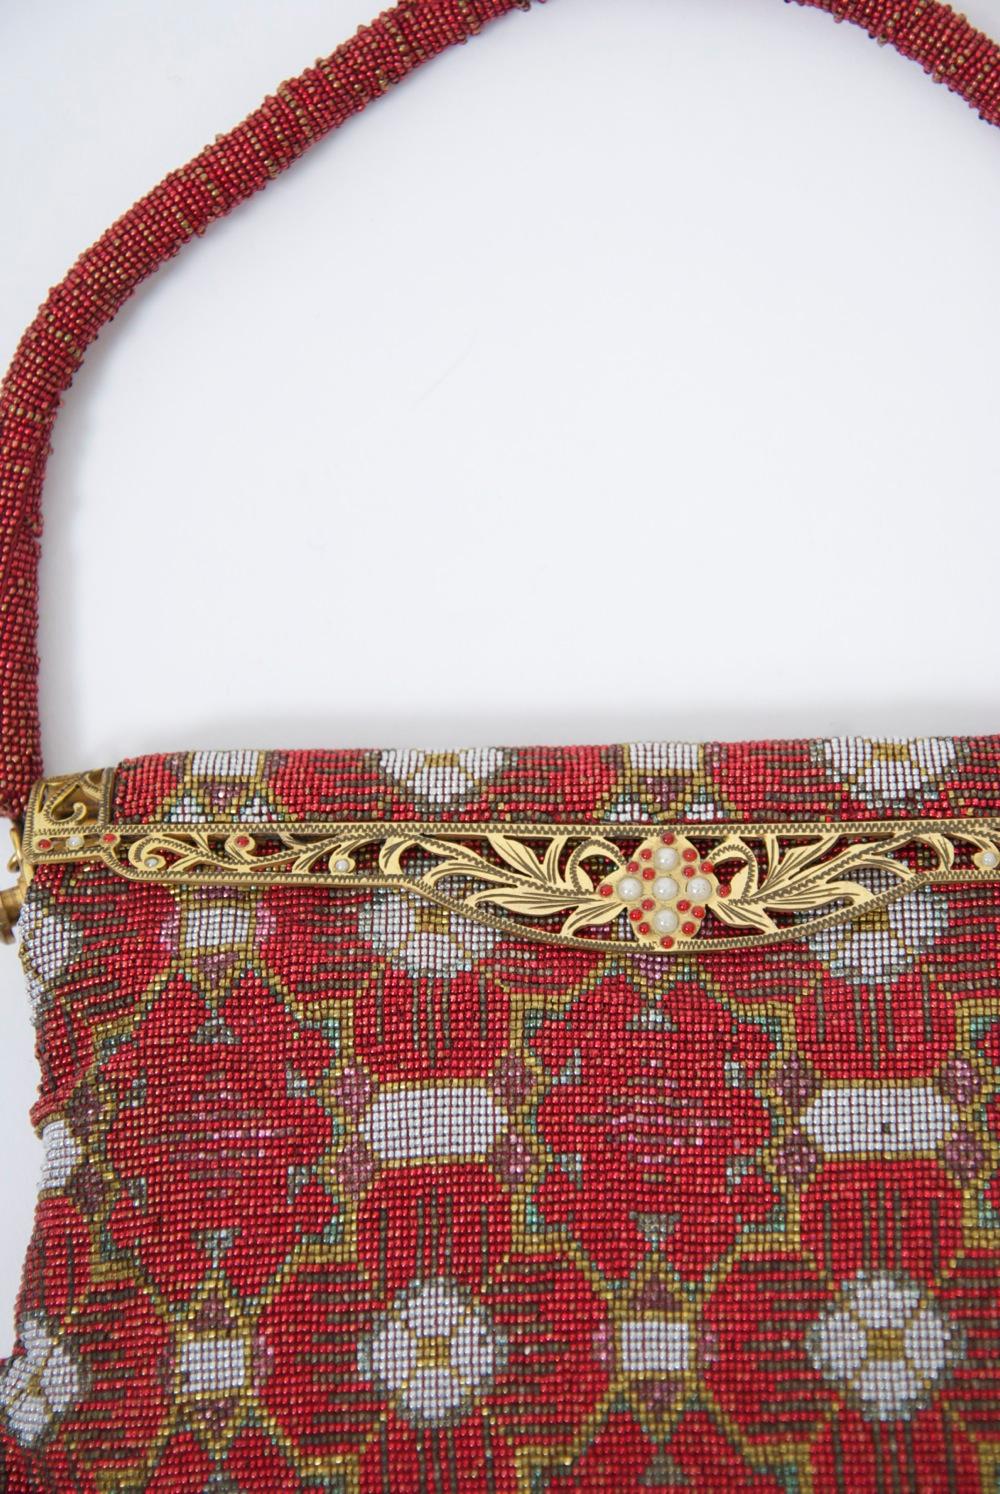 One of the most interesting designs I've seen of the high-style and beautifully crafted French beaded bags from the 1950s-'60s. This example has a red background, white quatrefoil designs and gold design outlines. Goldtone pierced frame, red beaded